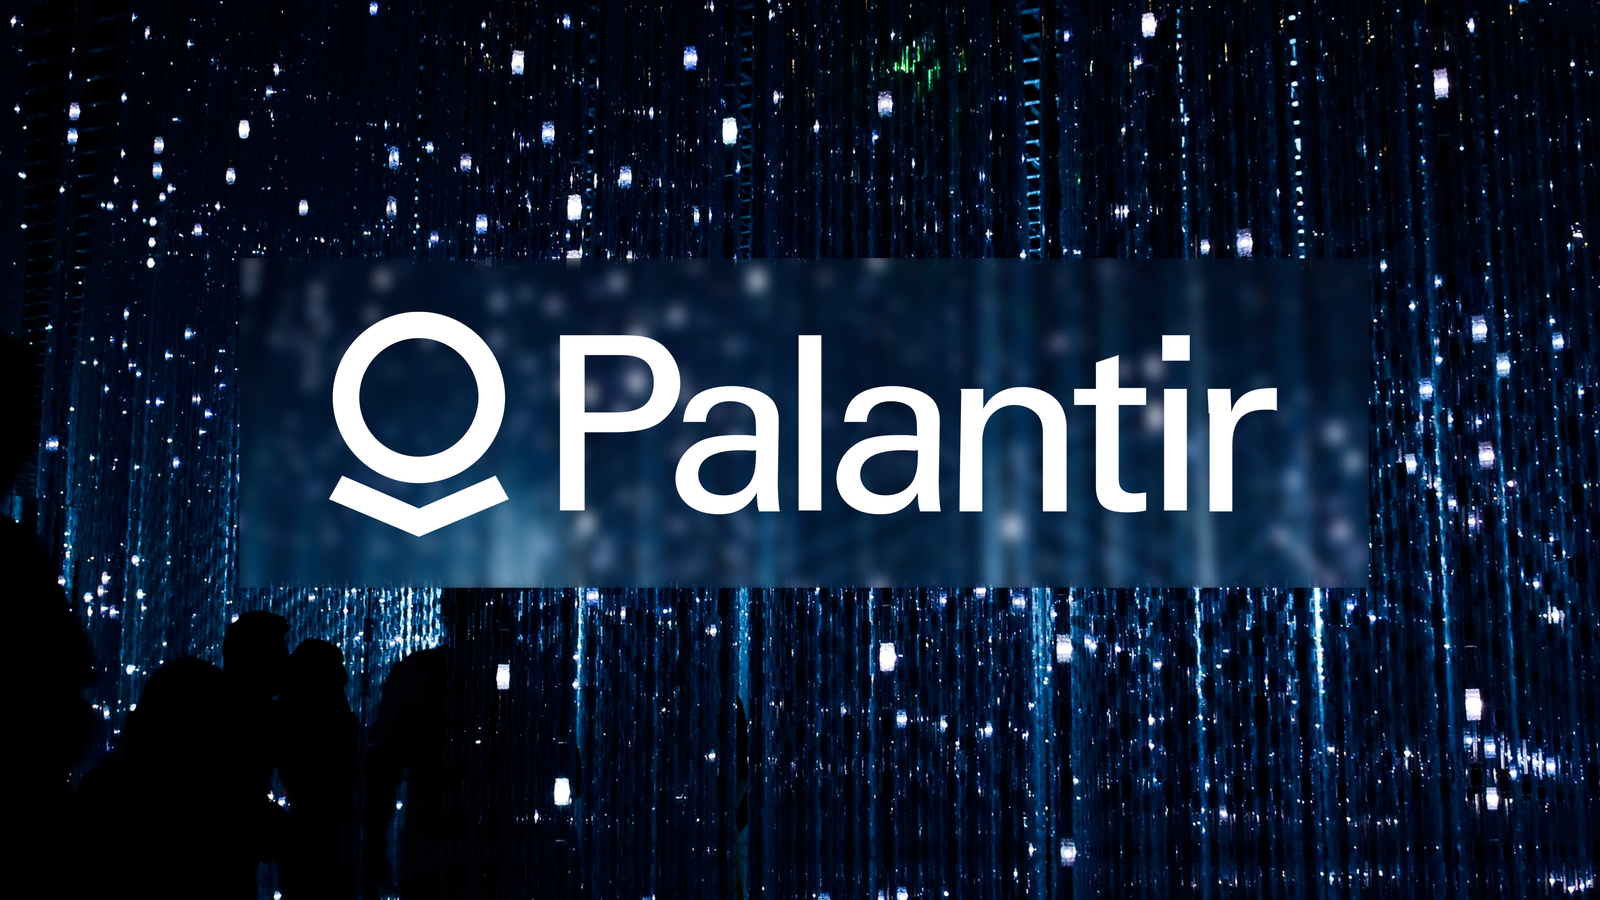 PLTR stock: Discounted Palantir stock could rise 25% in summer